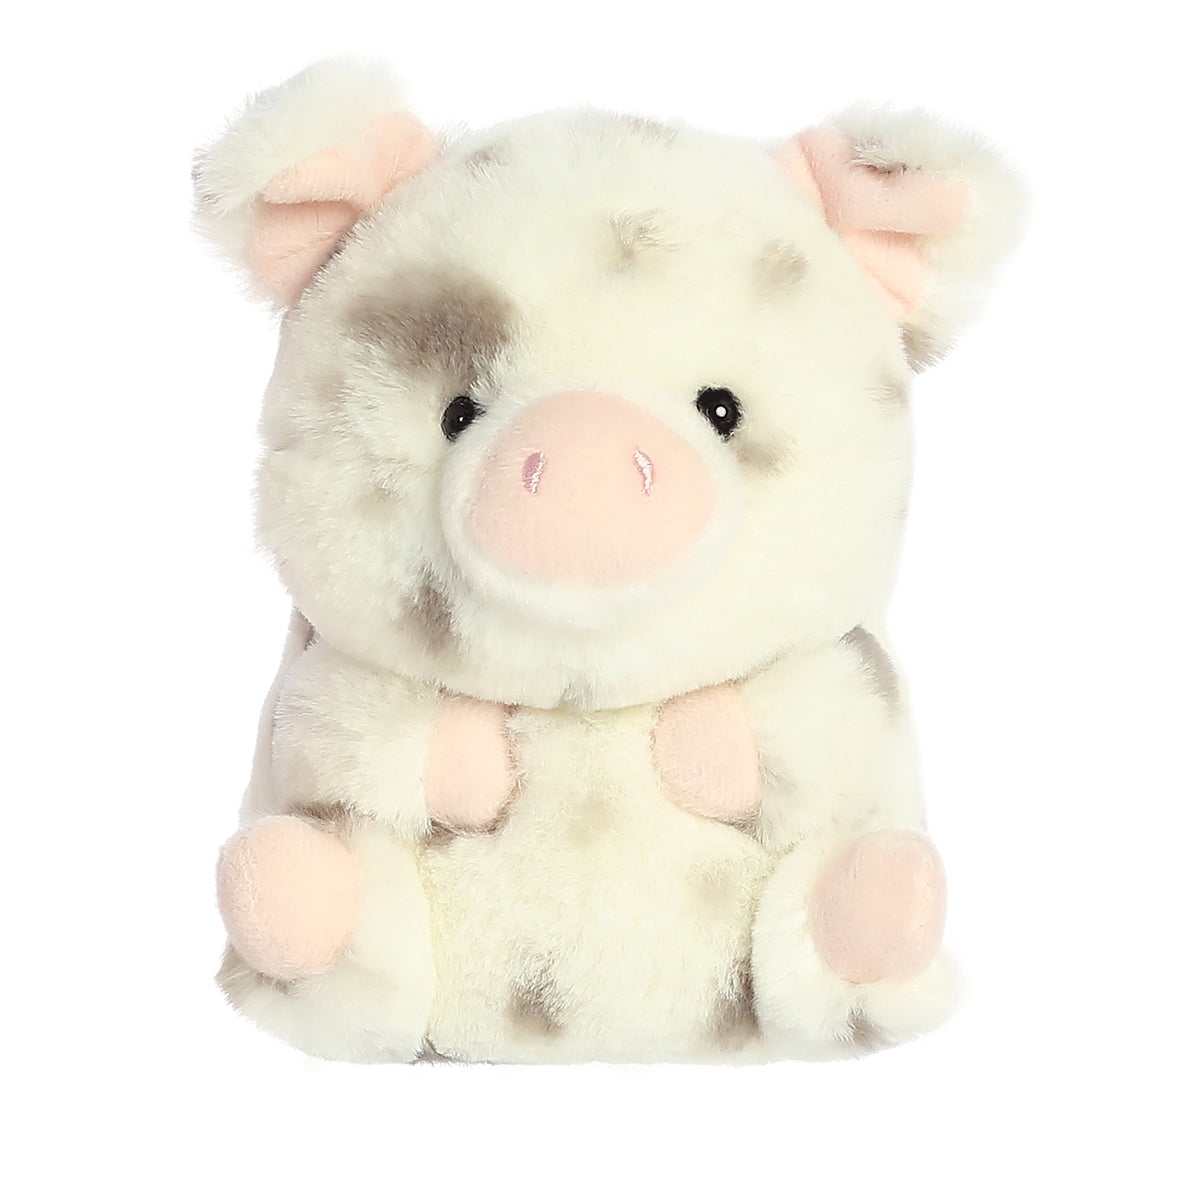 Pig plush in a unique white and gray spotted coat, featuring light pink accents on the nose, paws, and ears, rolling in fun.